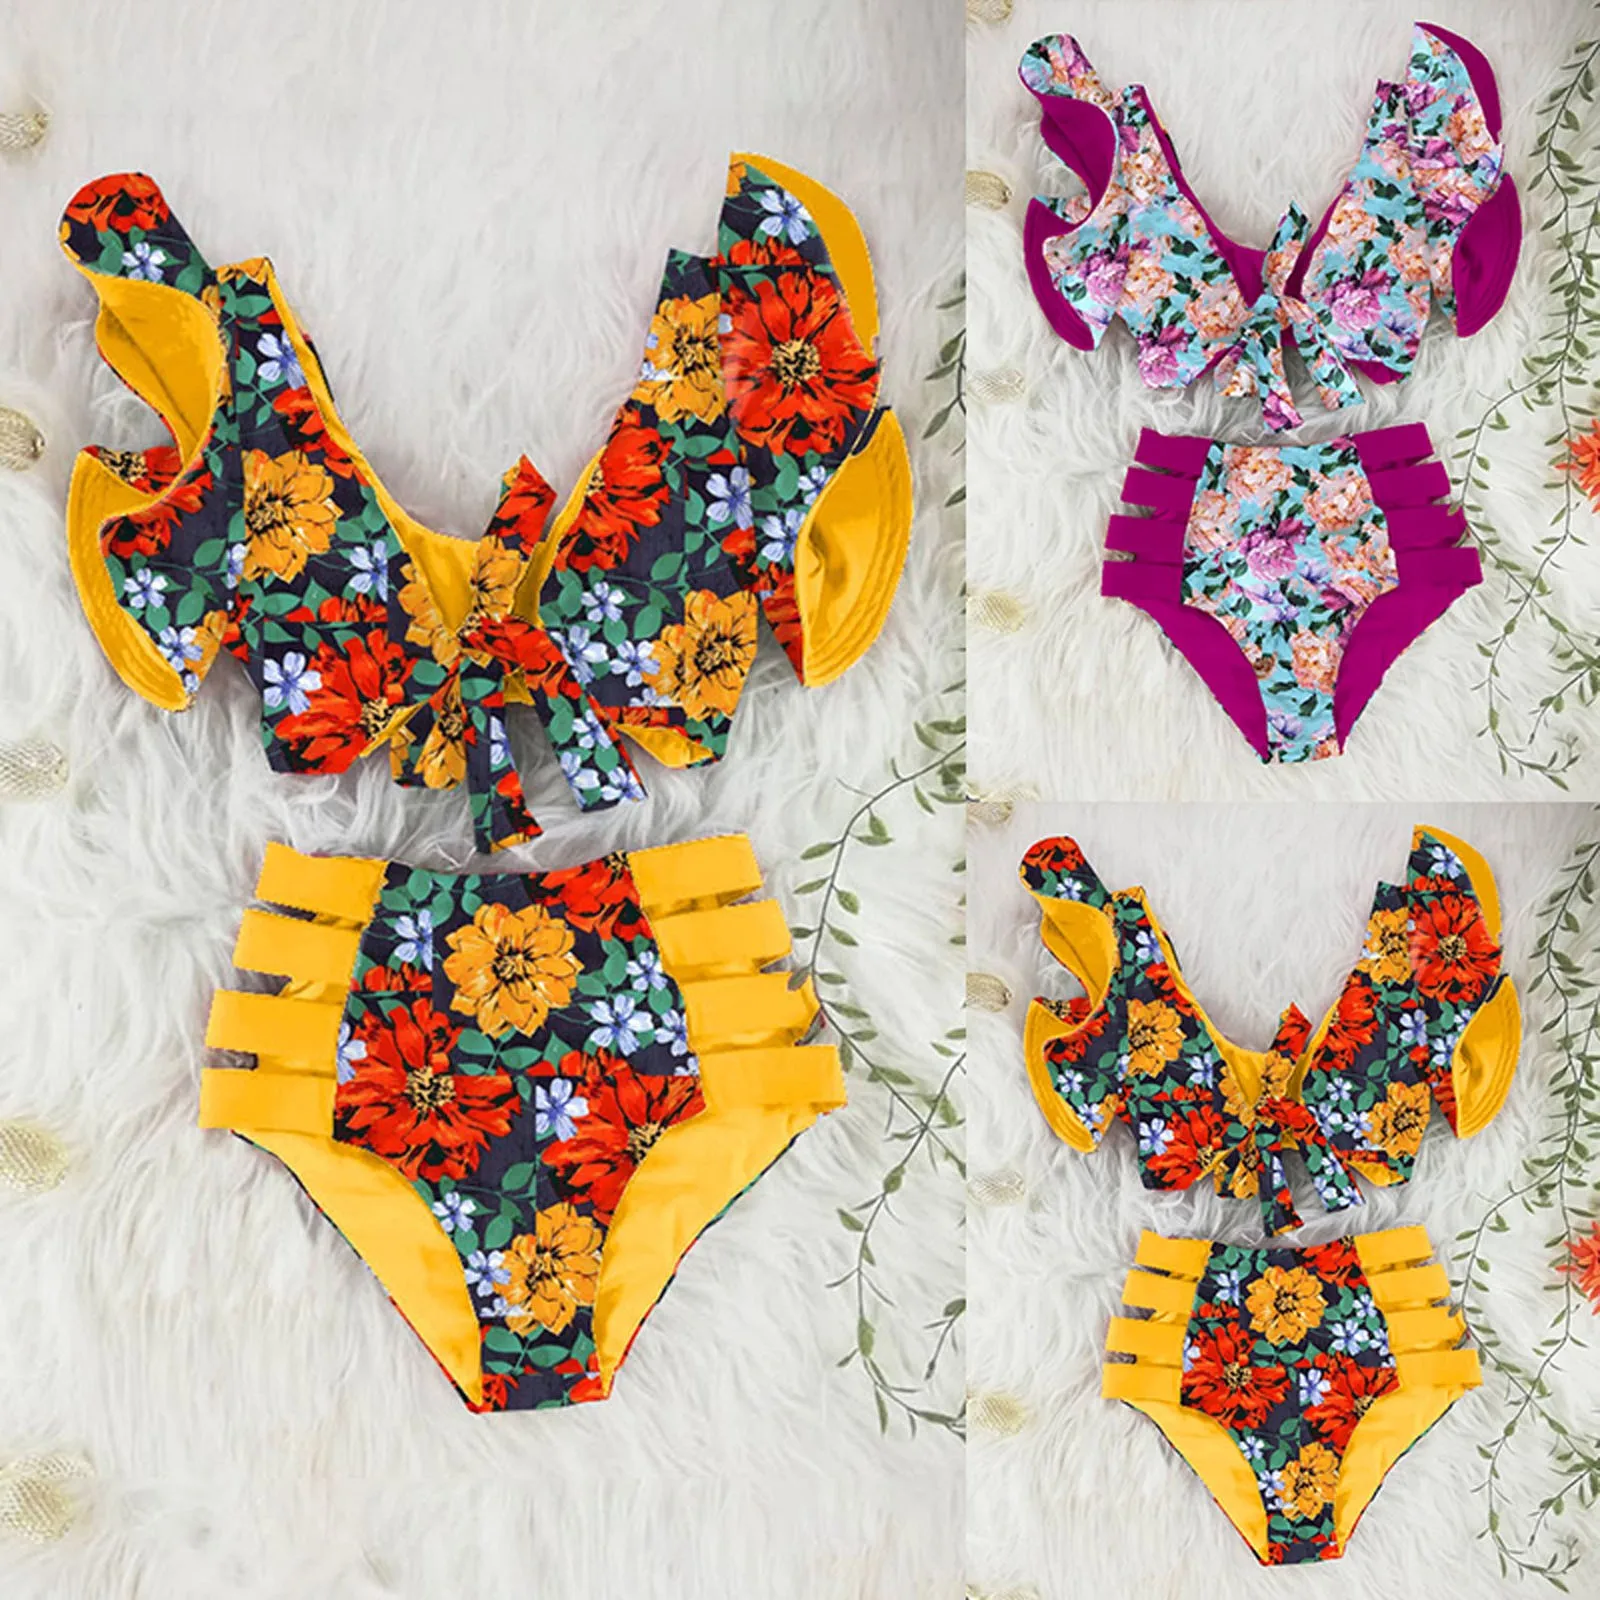 

Fashion Floral Print Bikini With Breast Pad No Steel Holder Lace Up Sexy Swimsuit Split Swimsuit Beachwear Biquinis Padded